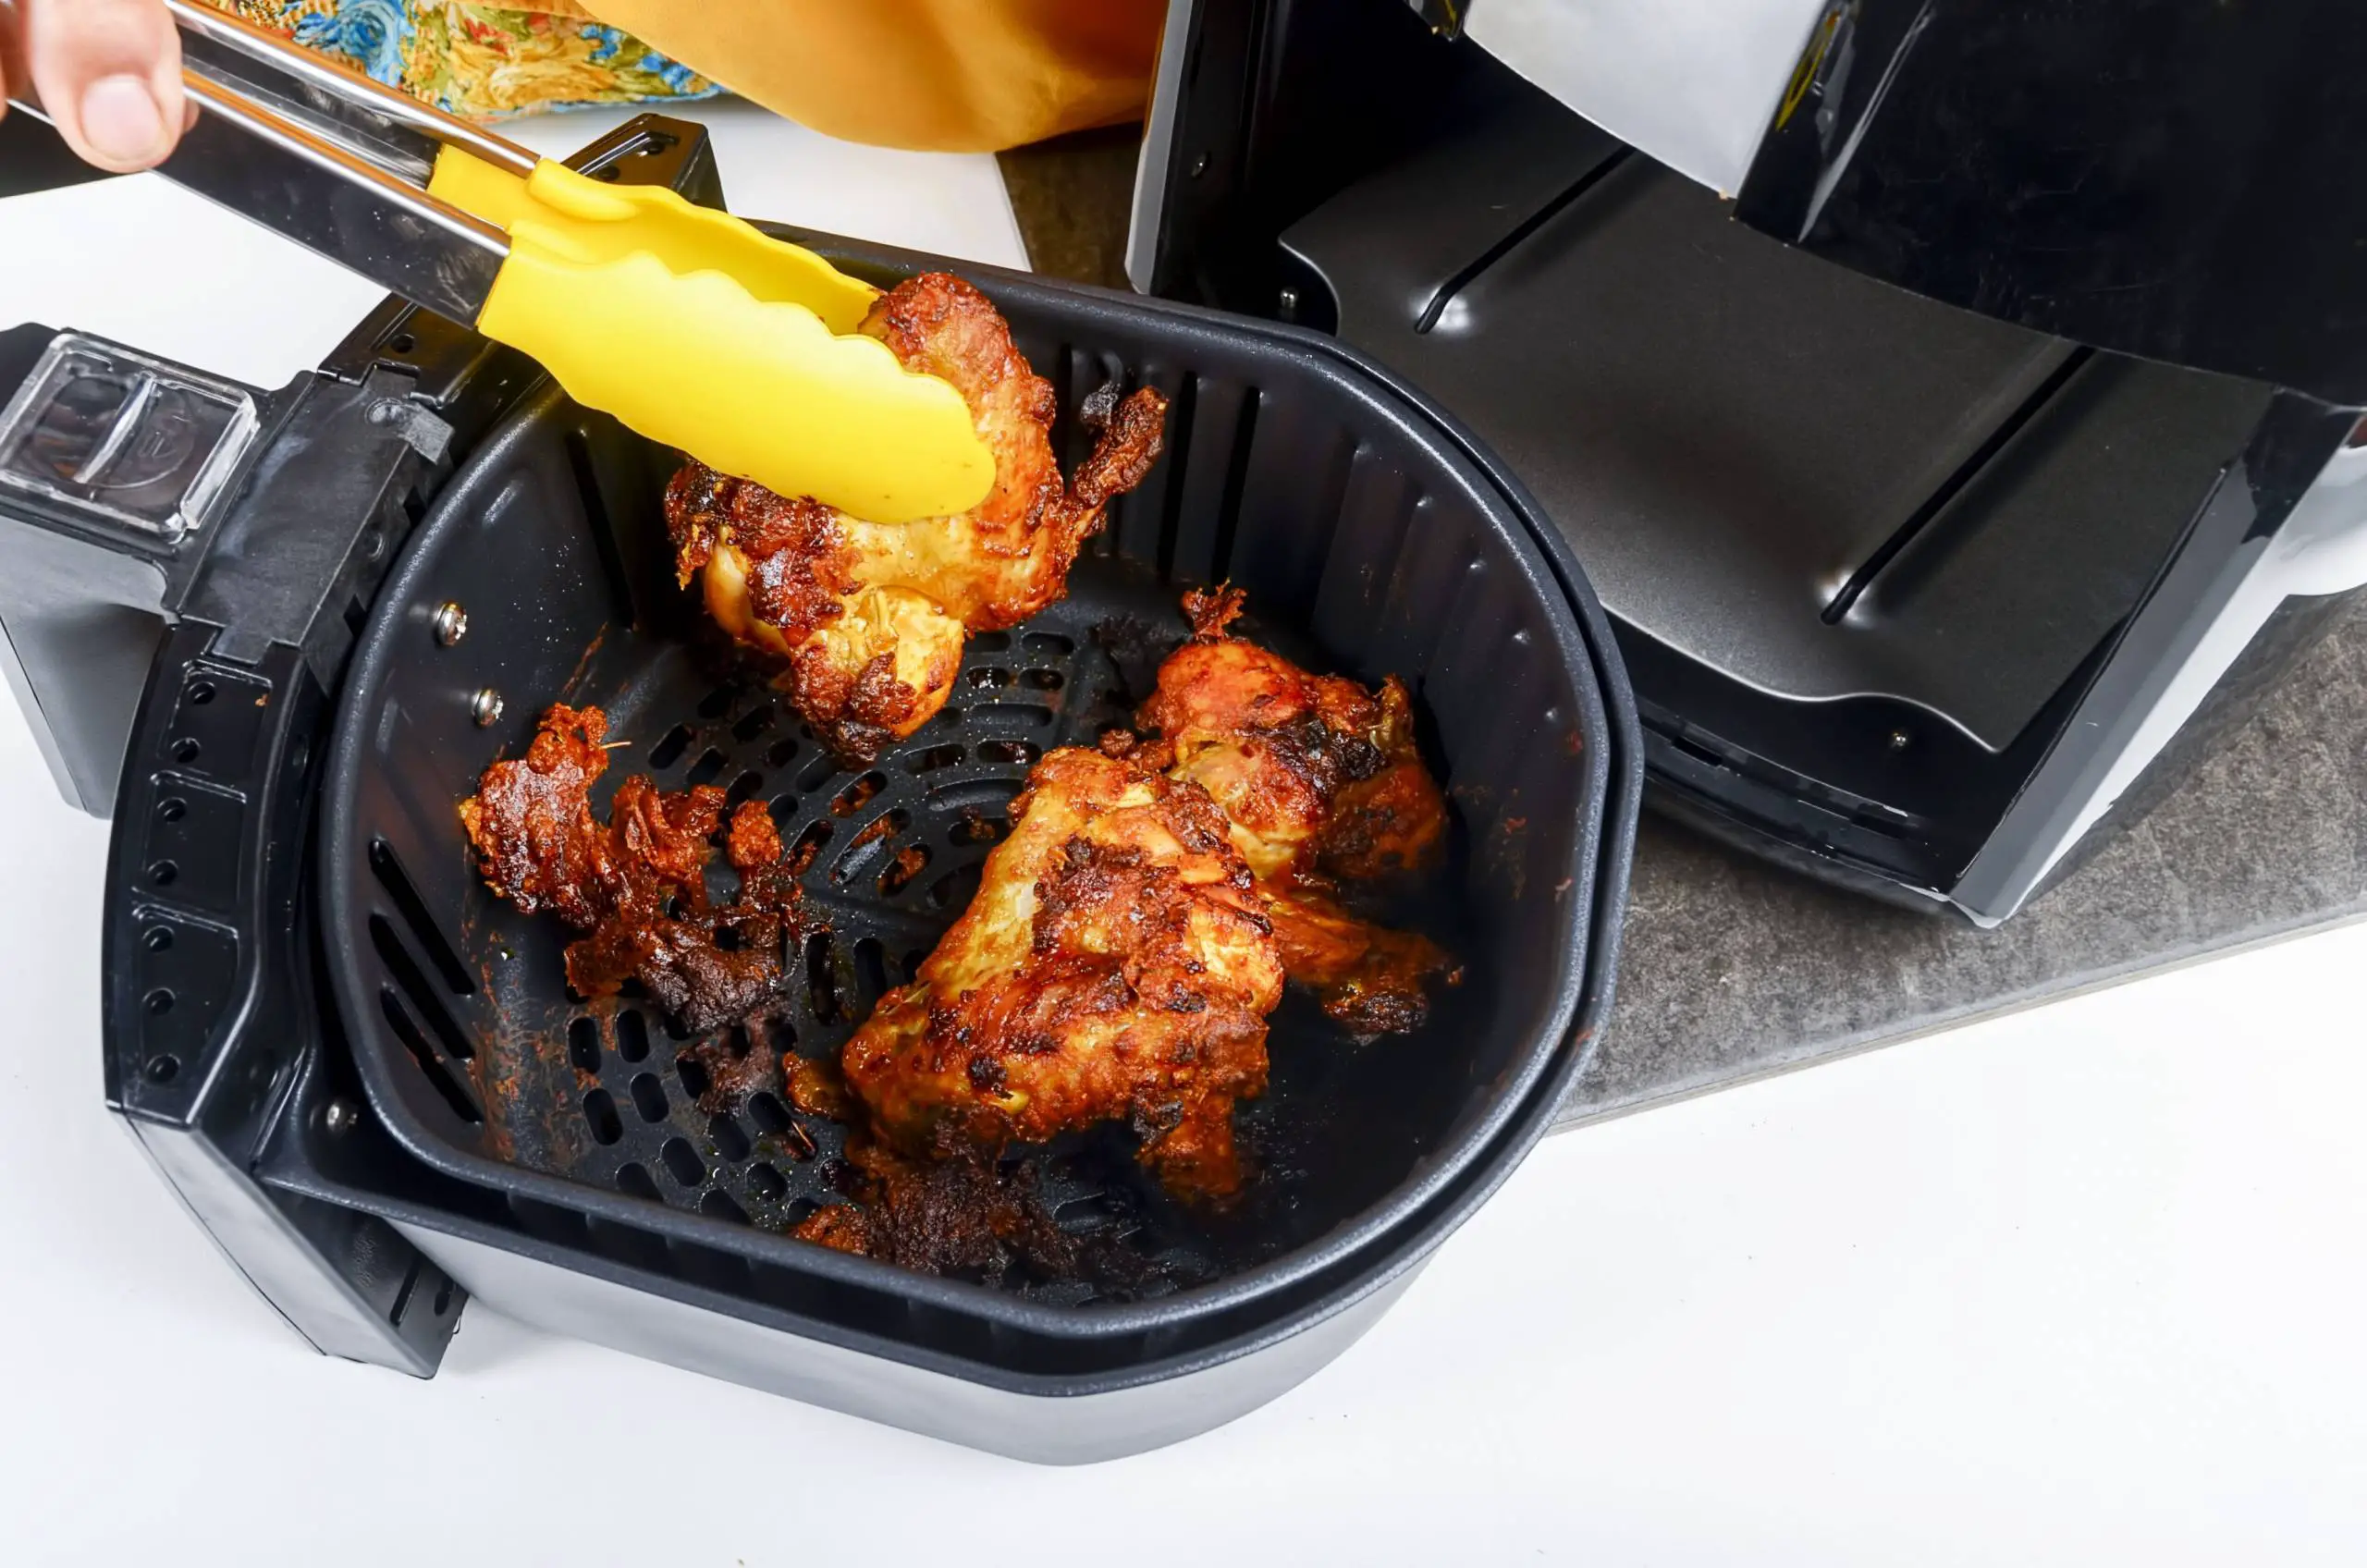 How do you keep food from sticking in an air fryer?